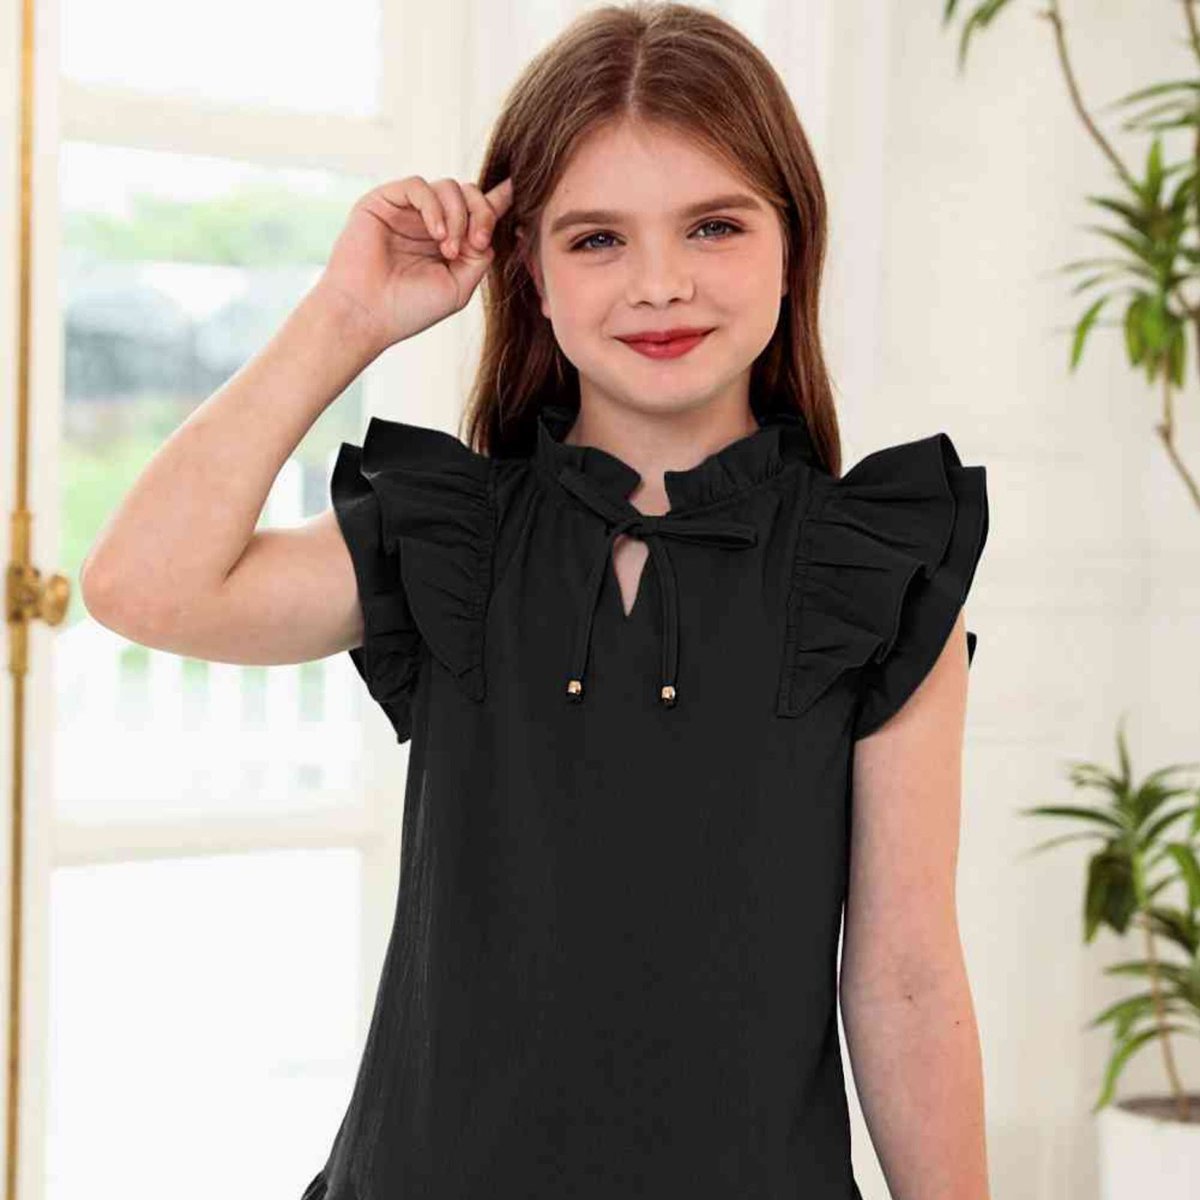 Dress your little one in charm with our Tie Neck Flutter Sleeve Dress! 🎀 Perfect for every occasion, its whimsical design and comfy fit will make her shine like a star. 💃 - Shop now and let her twirl in style! 🌐 empirewardrobe.com . #kidsfashion #dressup